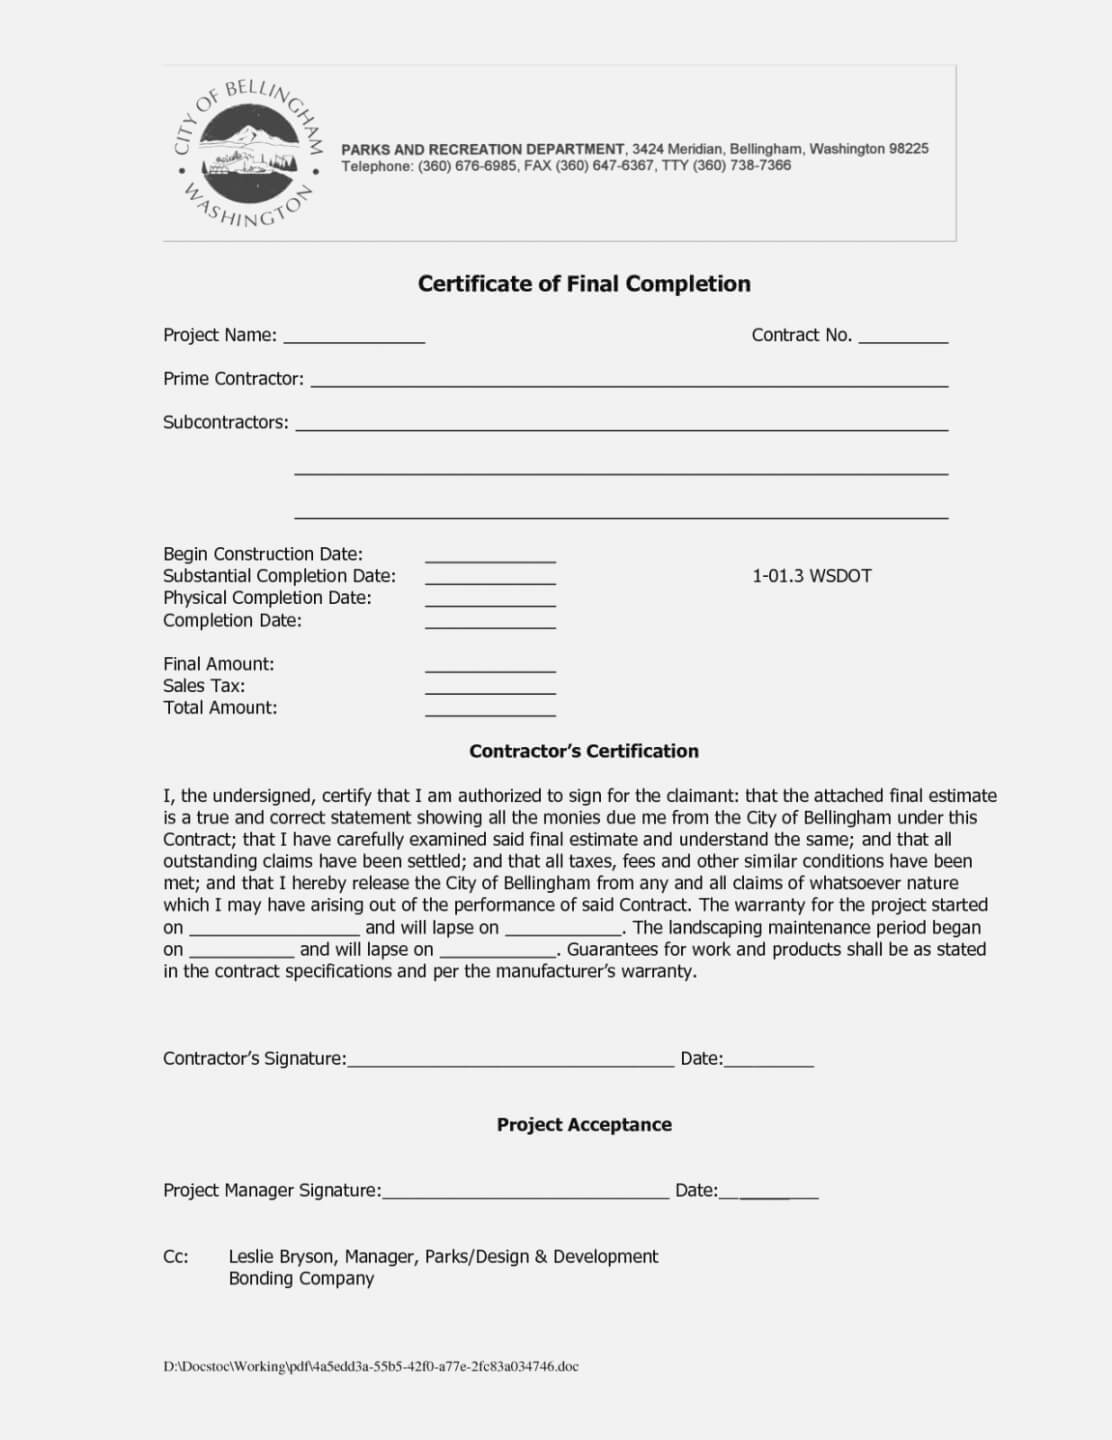 Roofing Certificate Of Completion Template – Yatay Throughout Certificate Of Completion Construction Templates